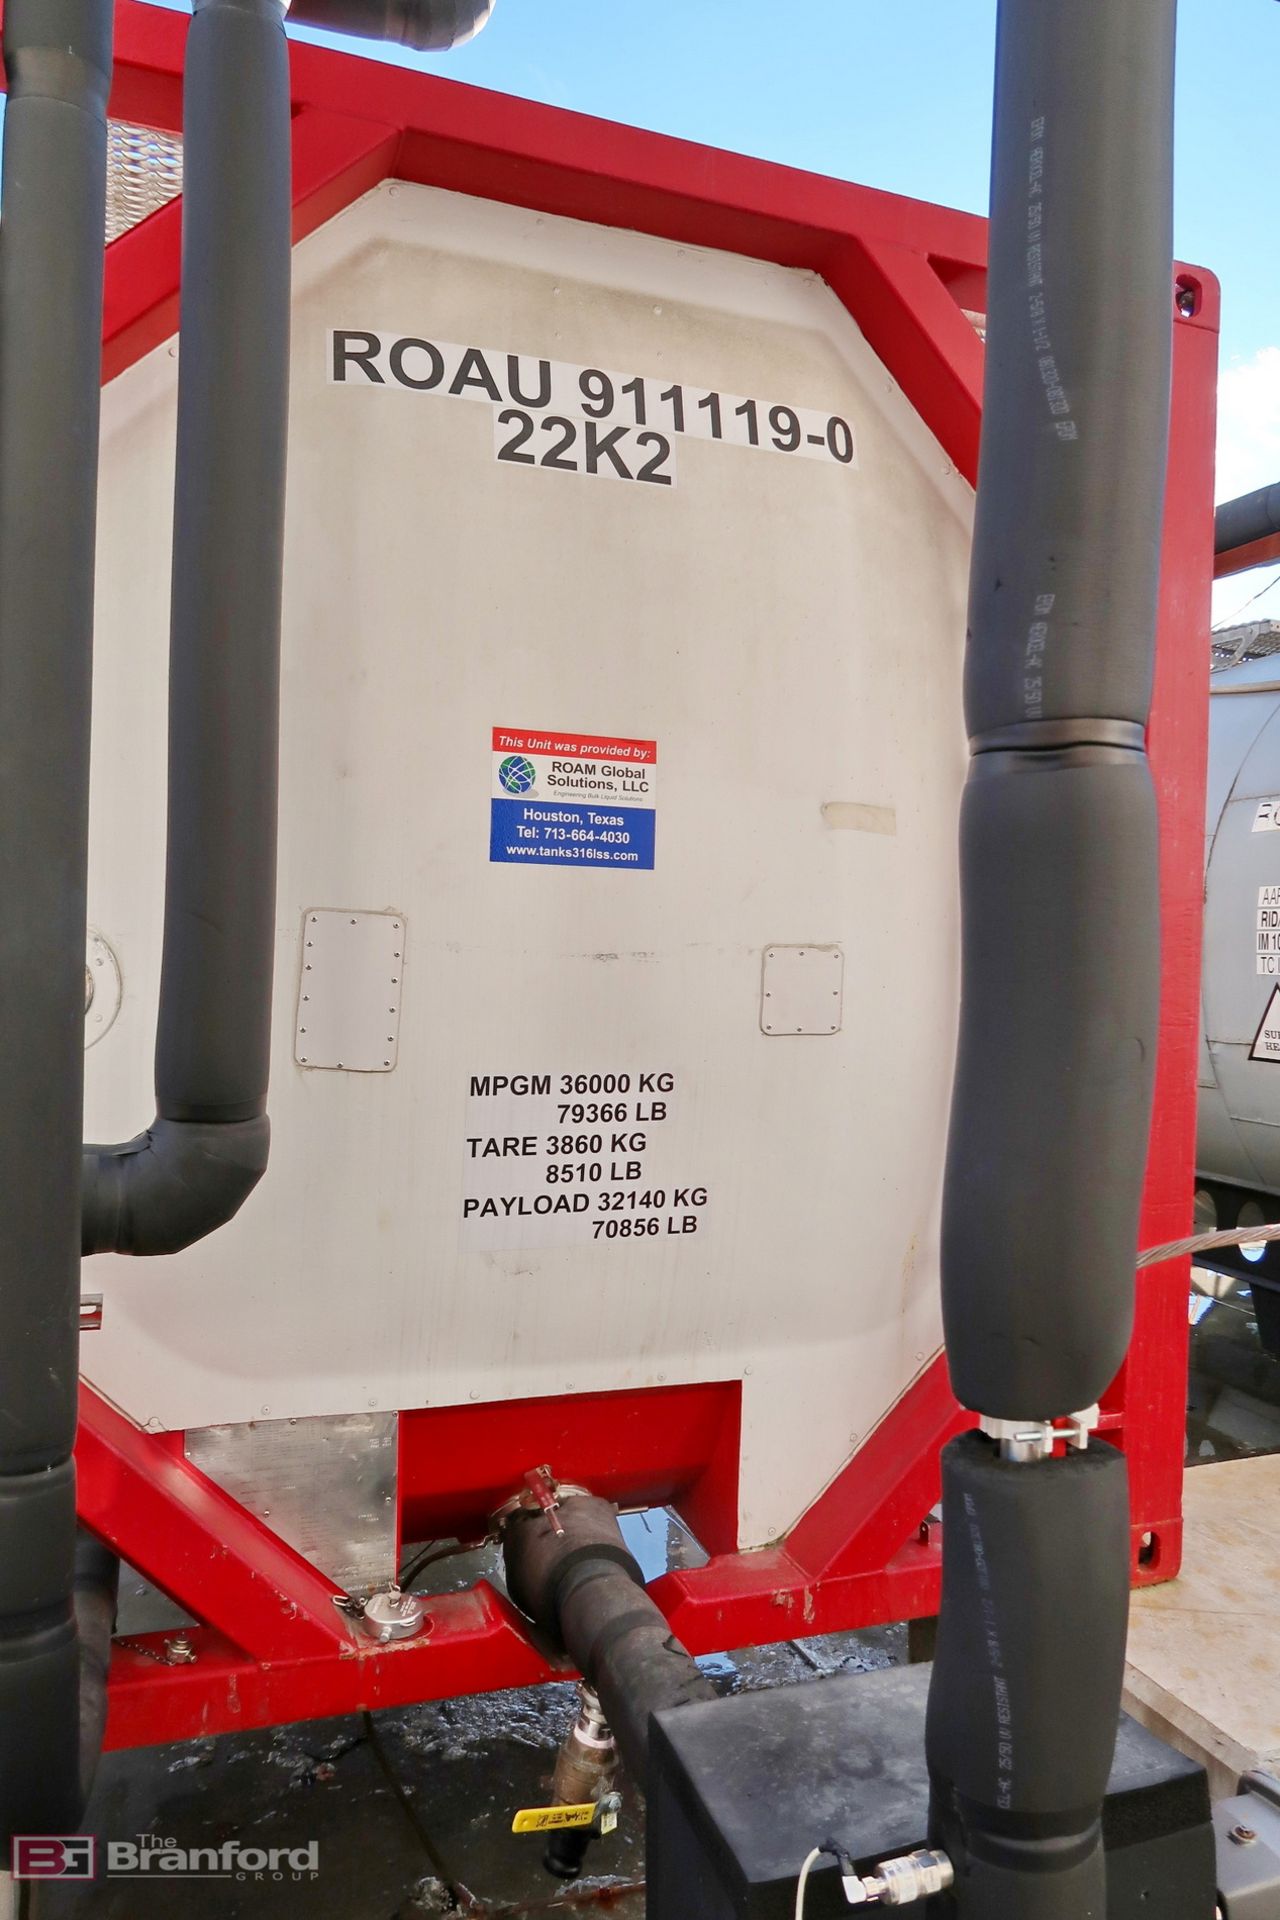 Roam Global stainless steel jacketed 24,000-liter ISO tank - Image 3 of 3